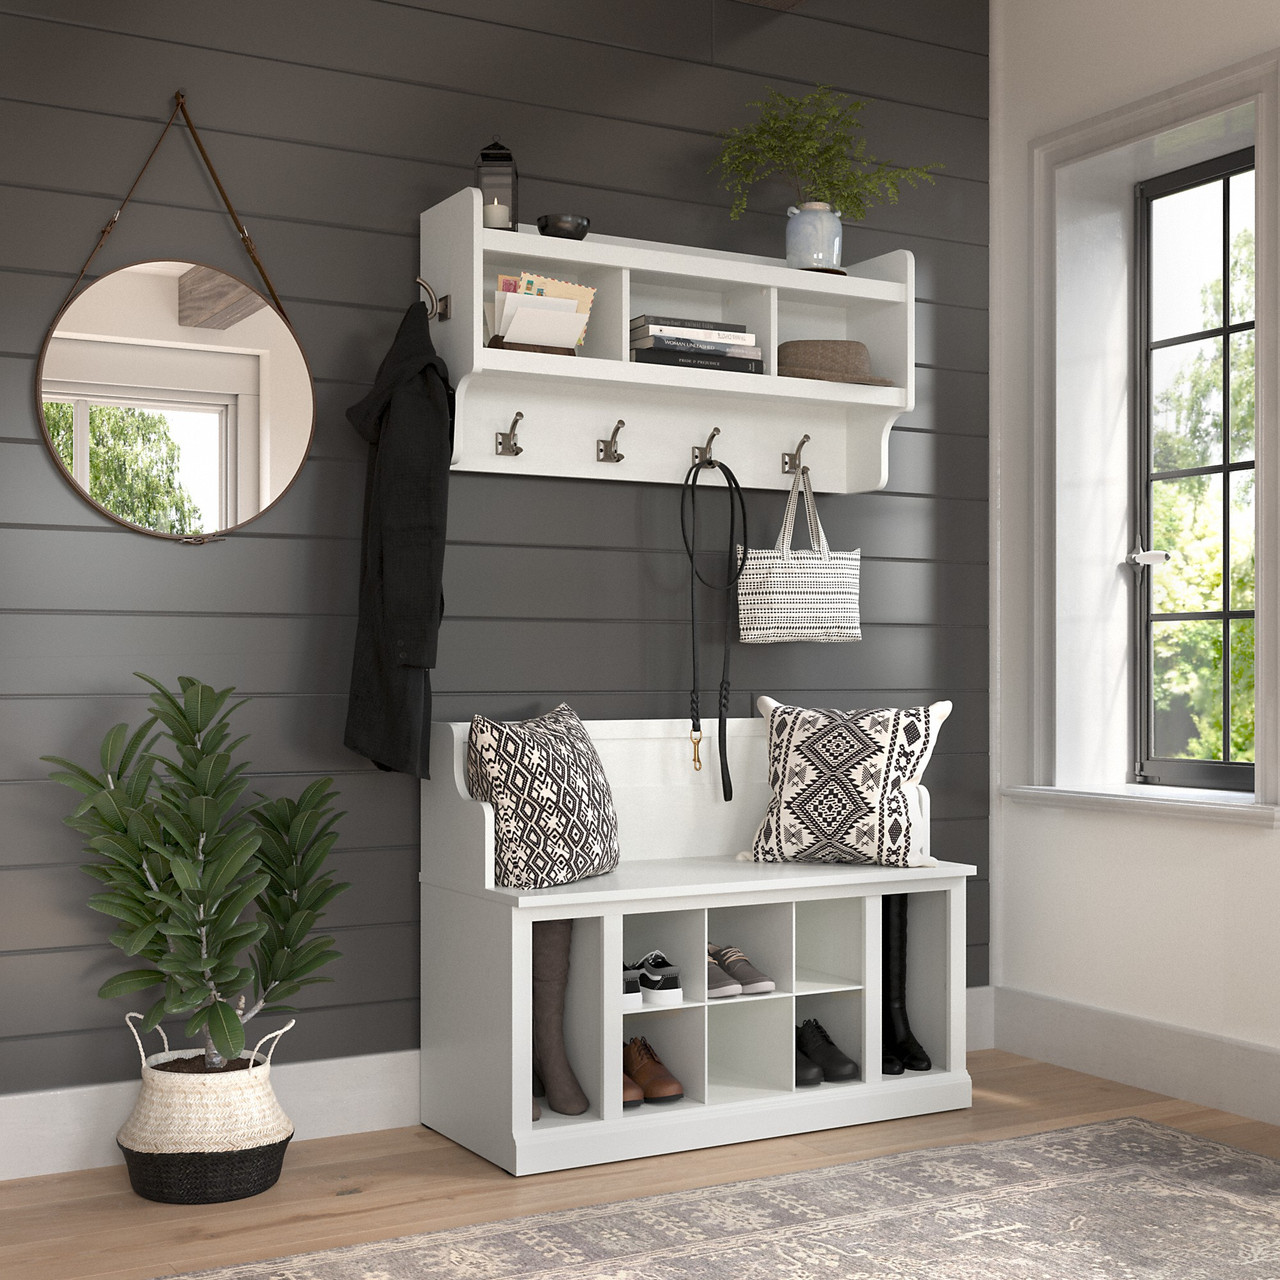 Kathy Ireland® Home by Bush Furniture Woodland 40W Entryway Bench with Shelves  and Wall Mounted Coat Rack in White Ash - WDL010WAS Free Shipping!